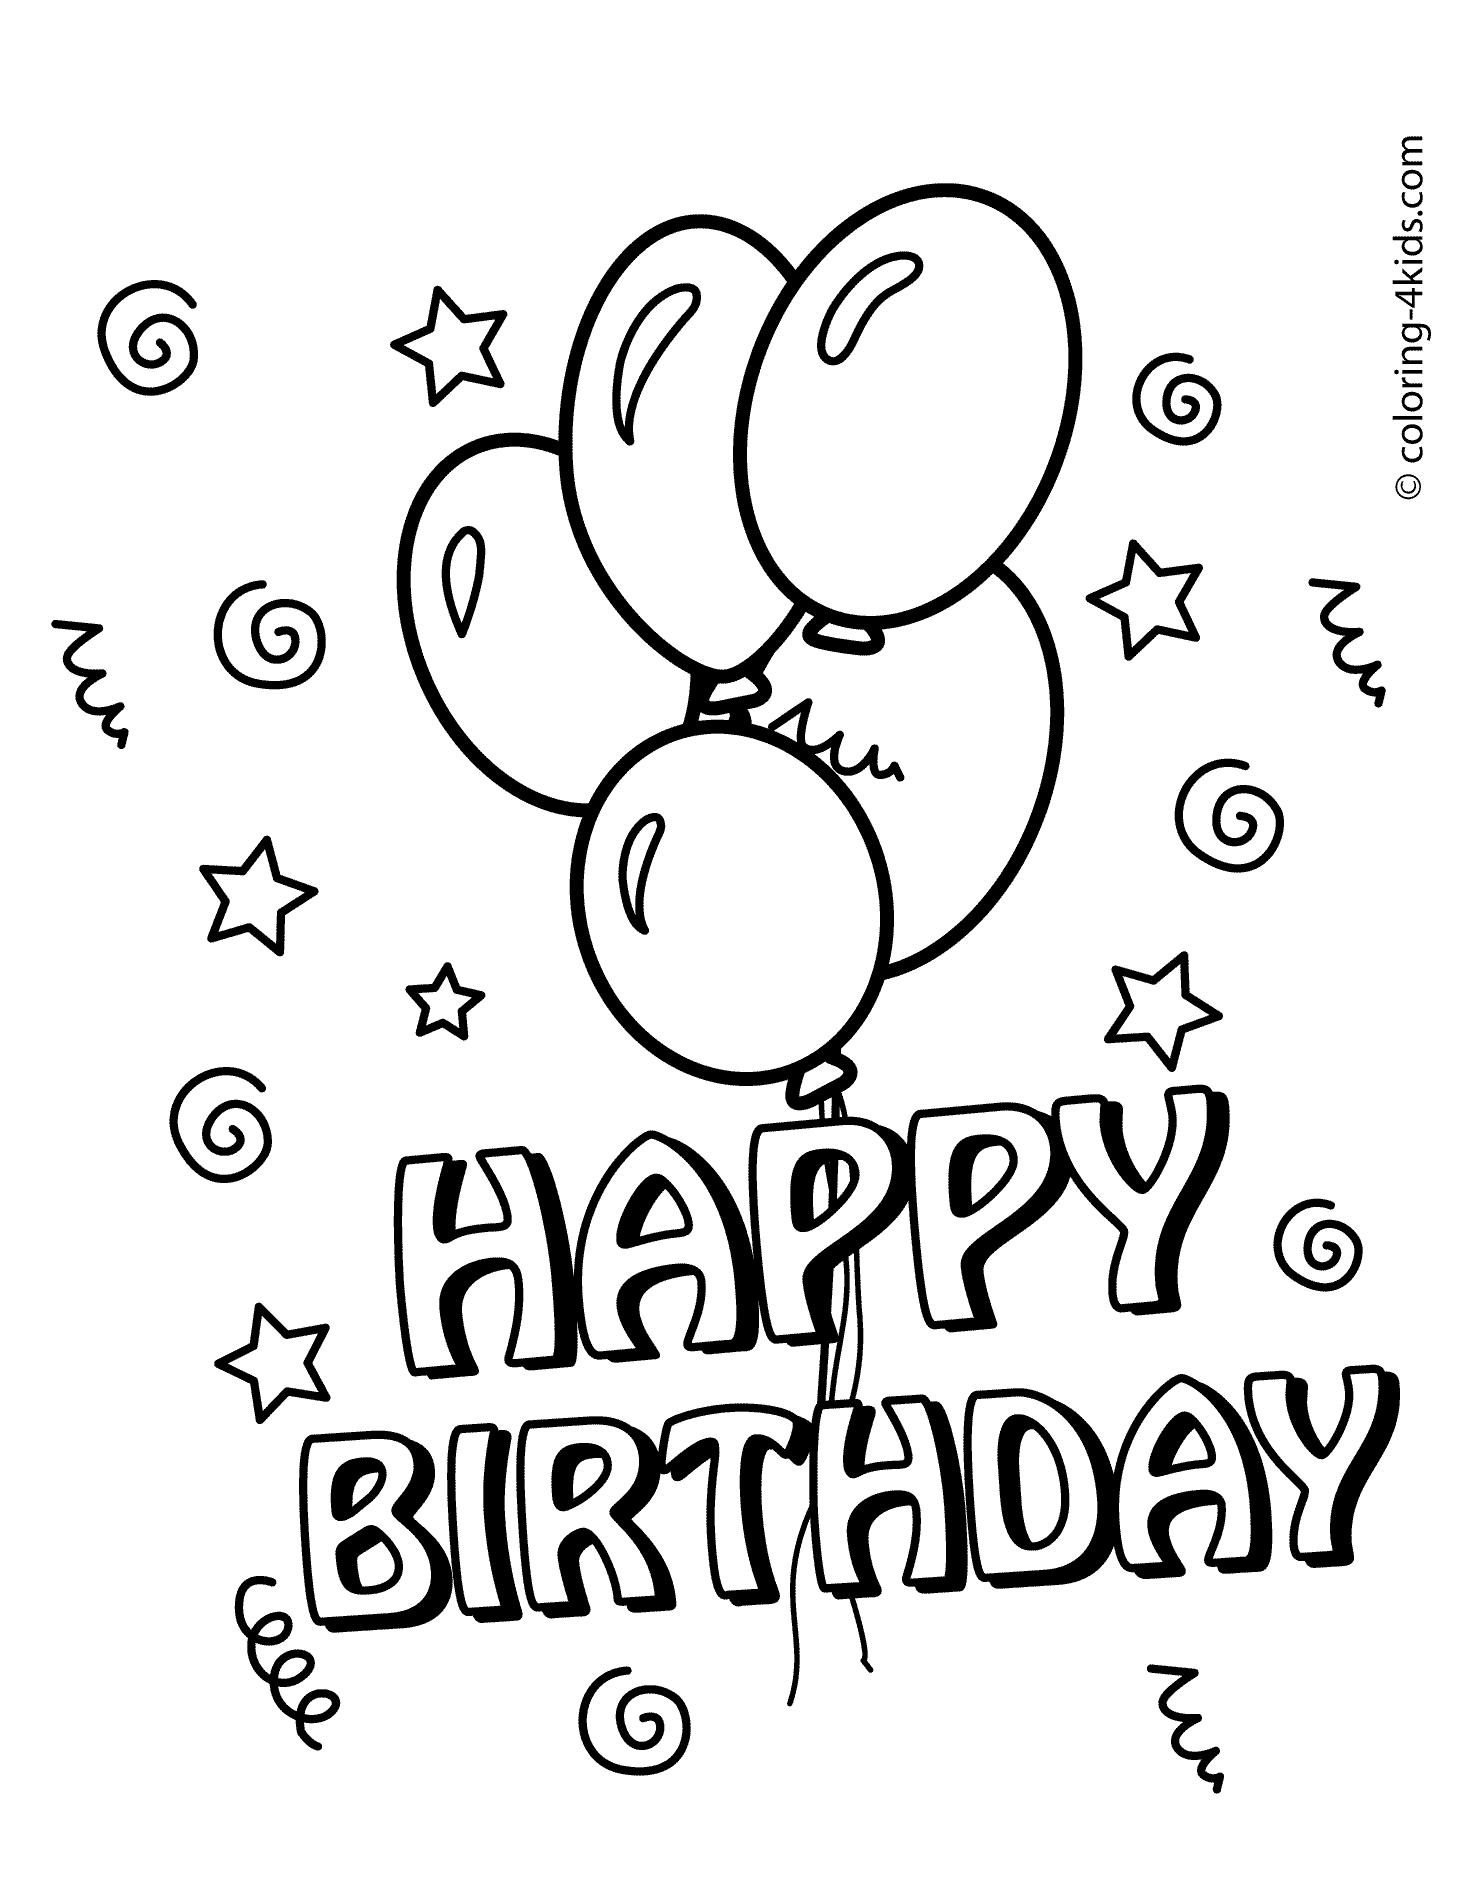 Birthday Cartoon Coloring Pages - Coloring Pages For All Ages